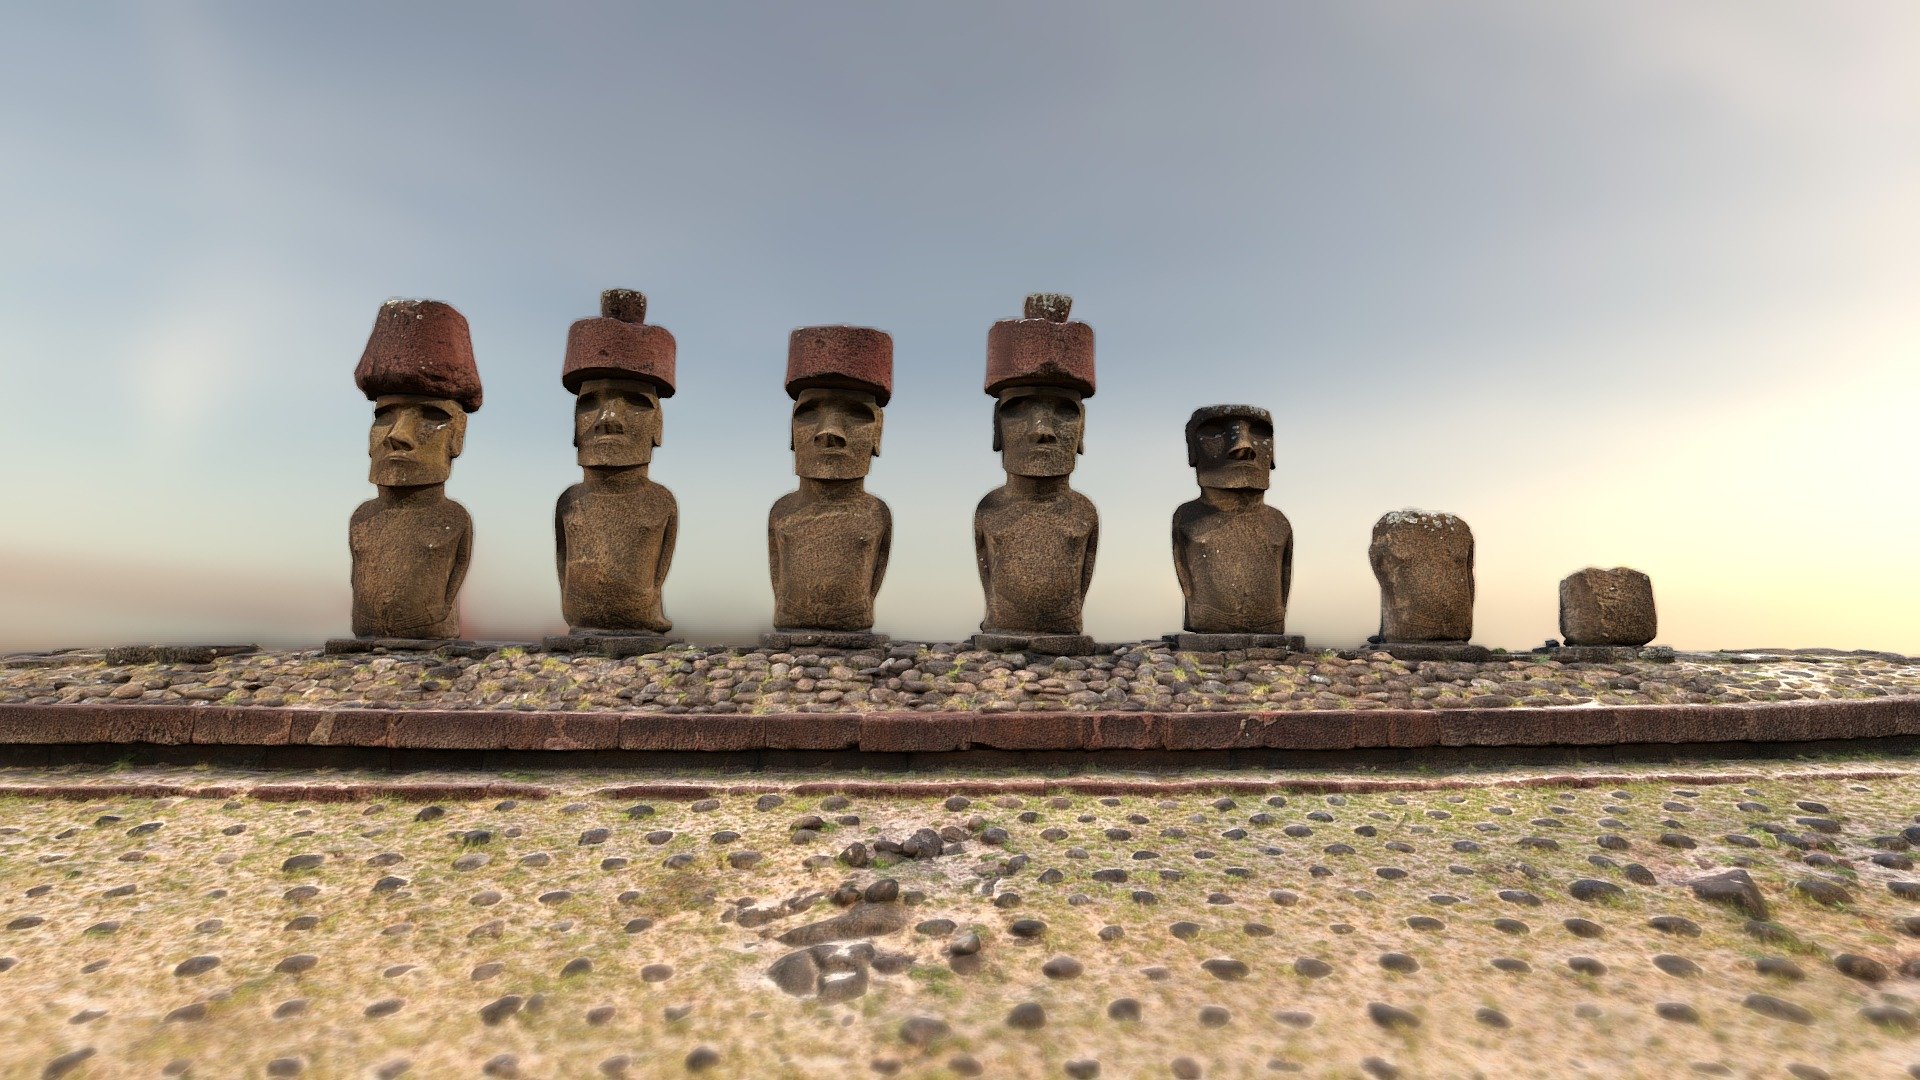 &ldquo;One of the most recognizable sites in Rapa Nui, Ahu Nau Nau is a restored ceremonial platform site w ith seven giant moai statues.